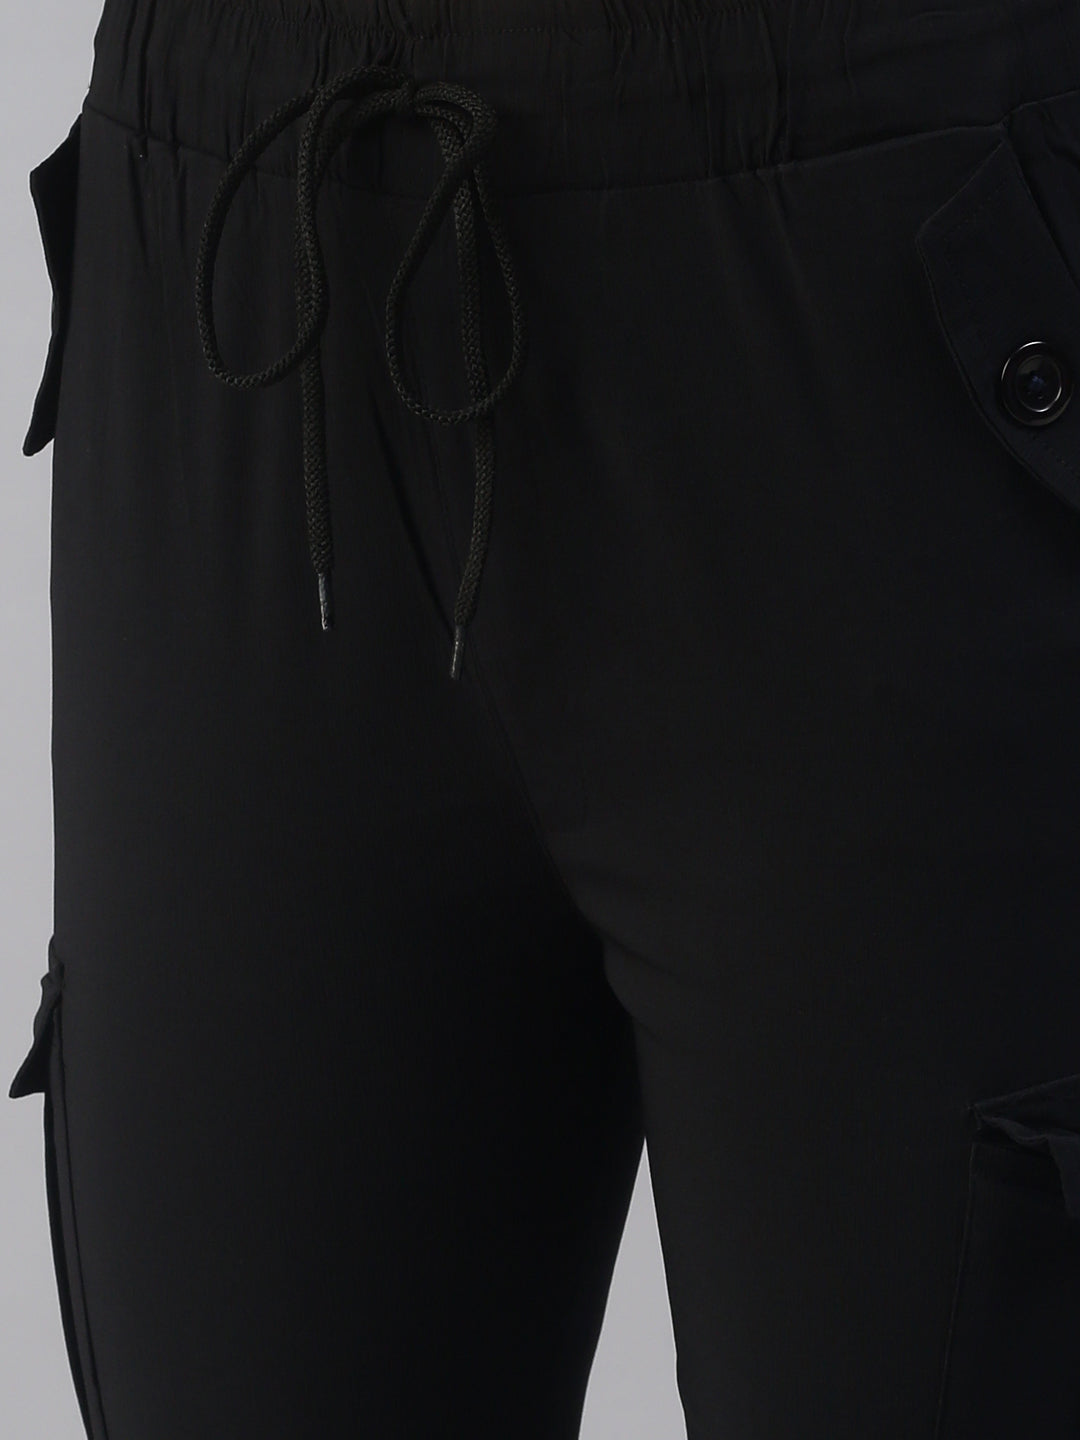 Women's Black Solid Joggers Track Pant